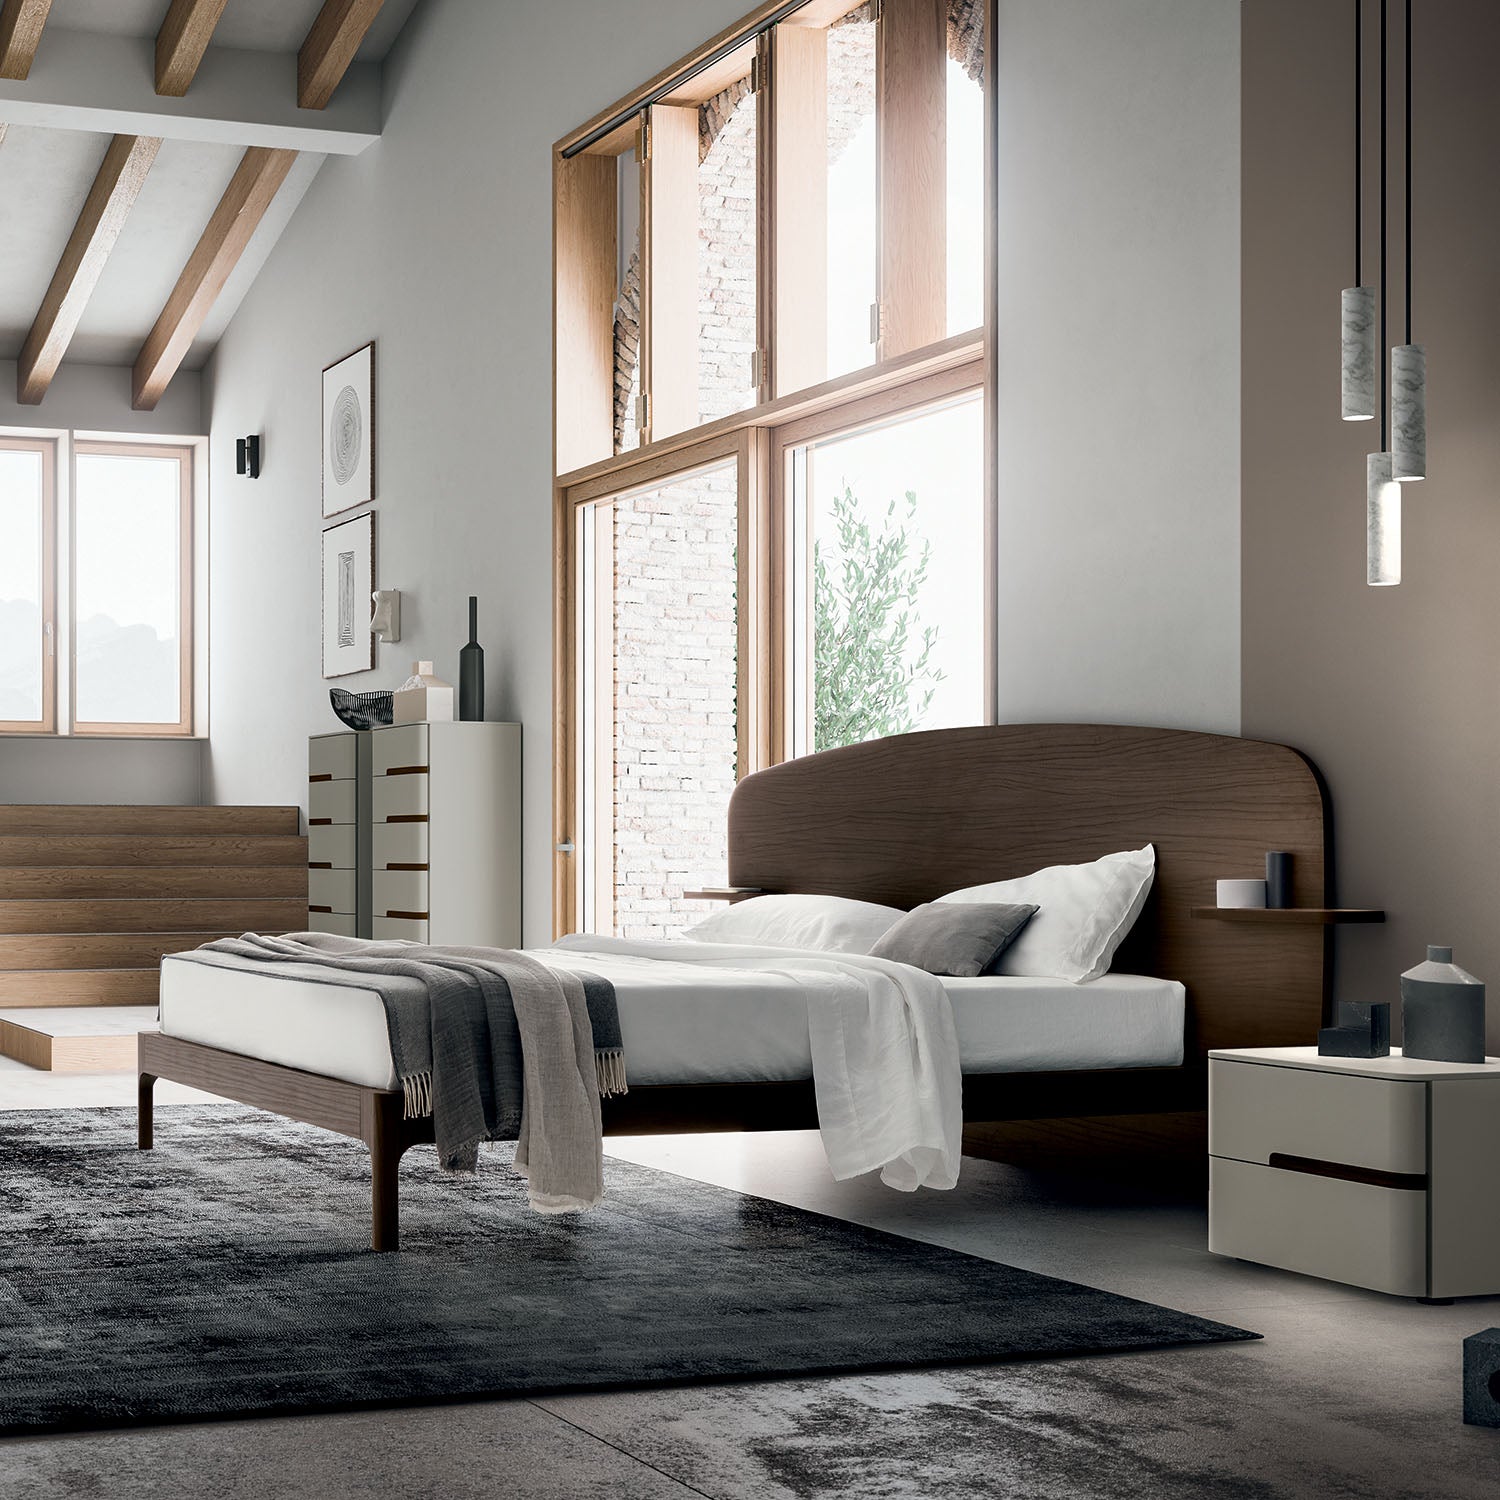 Nashi Wooden Bed by Santa Lucia